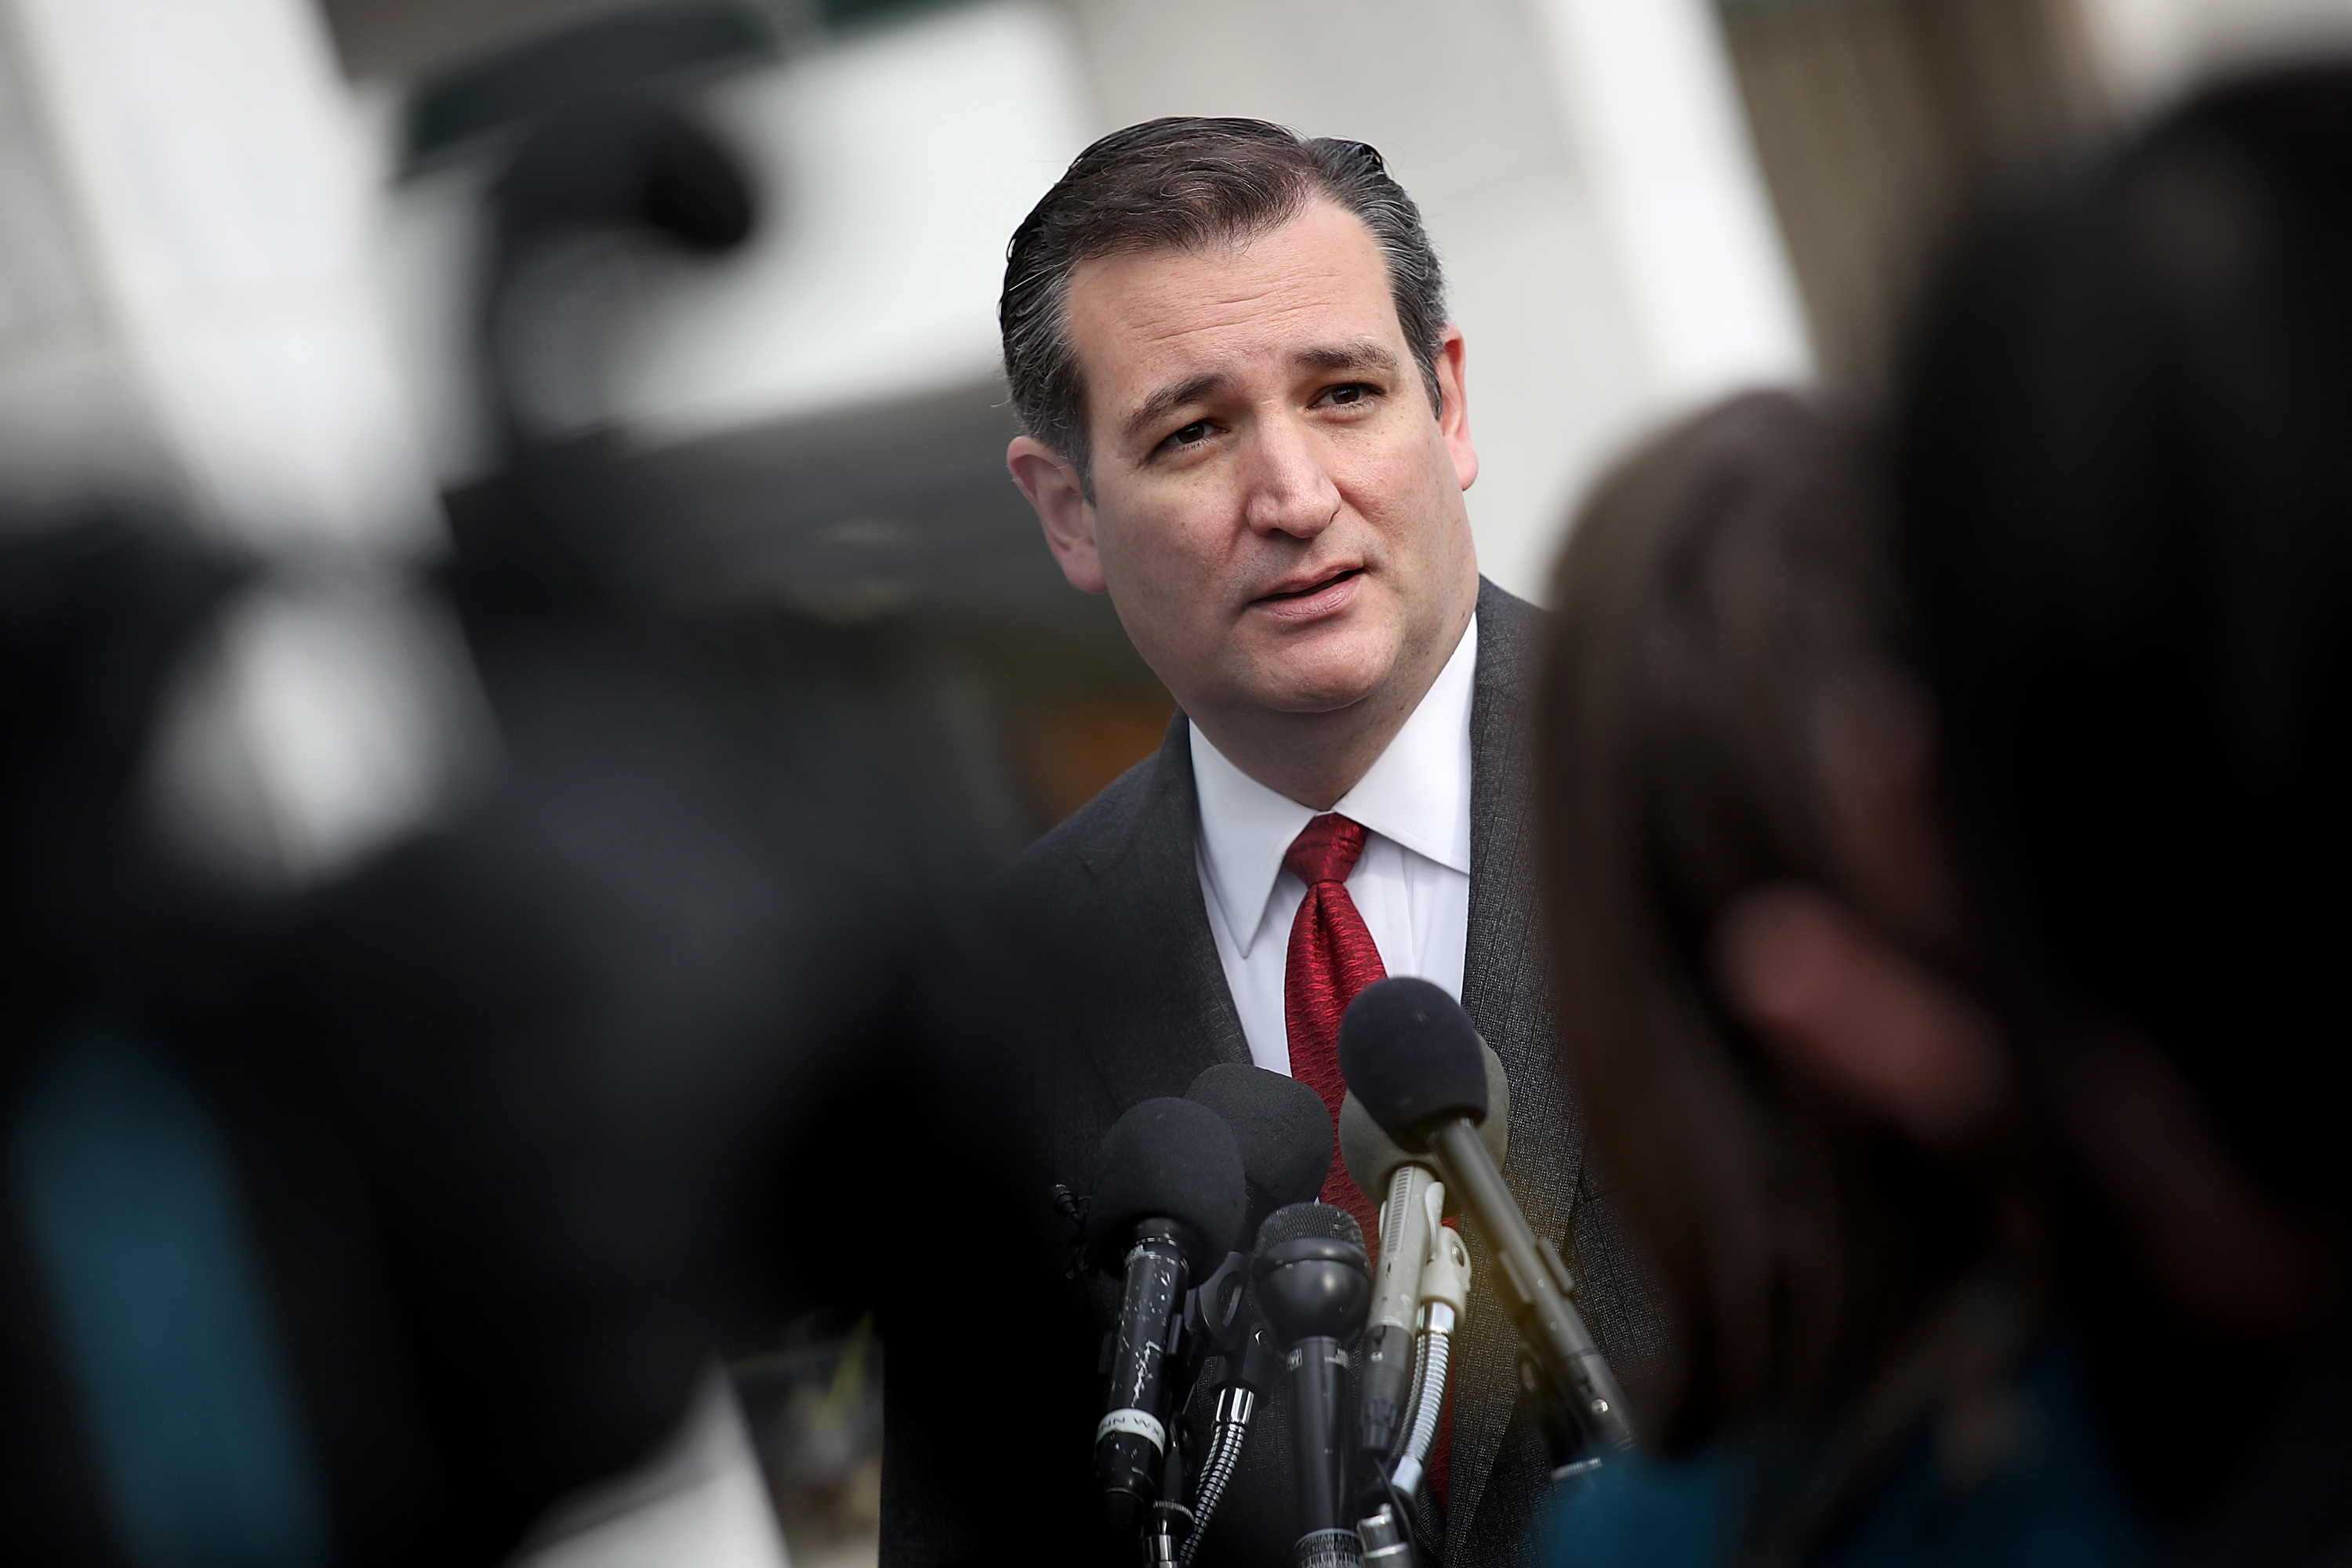 Republican presidential candidate Sen. Ted Cruz (R-TX) addresses the bombings in Brussels during remarks March 22, 2016 in Washington, DC (Win McNamee—Getty Images)